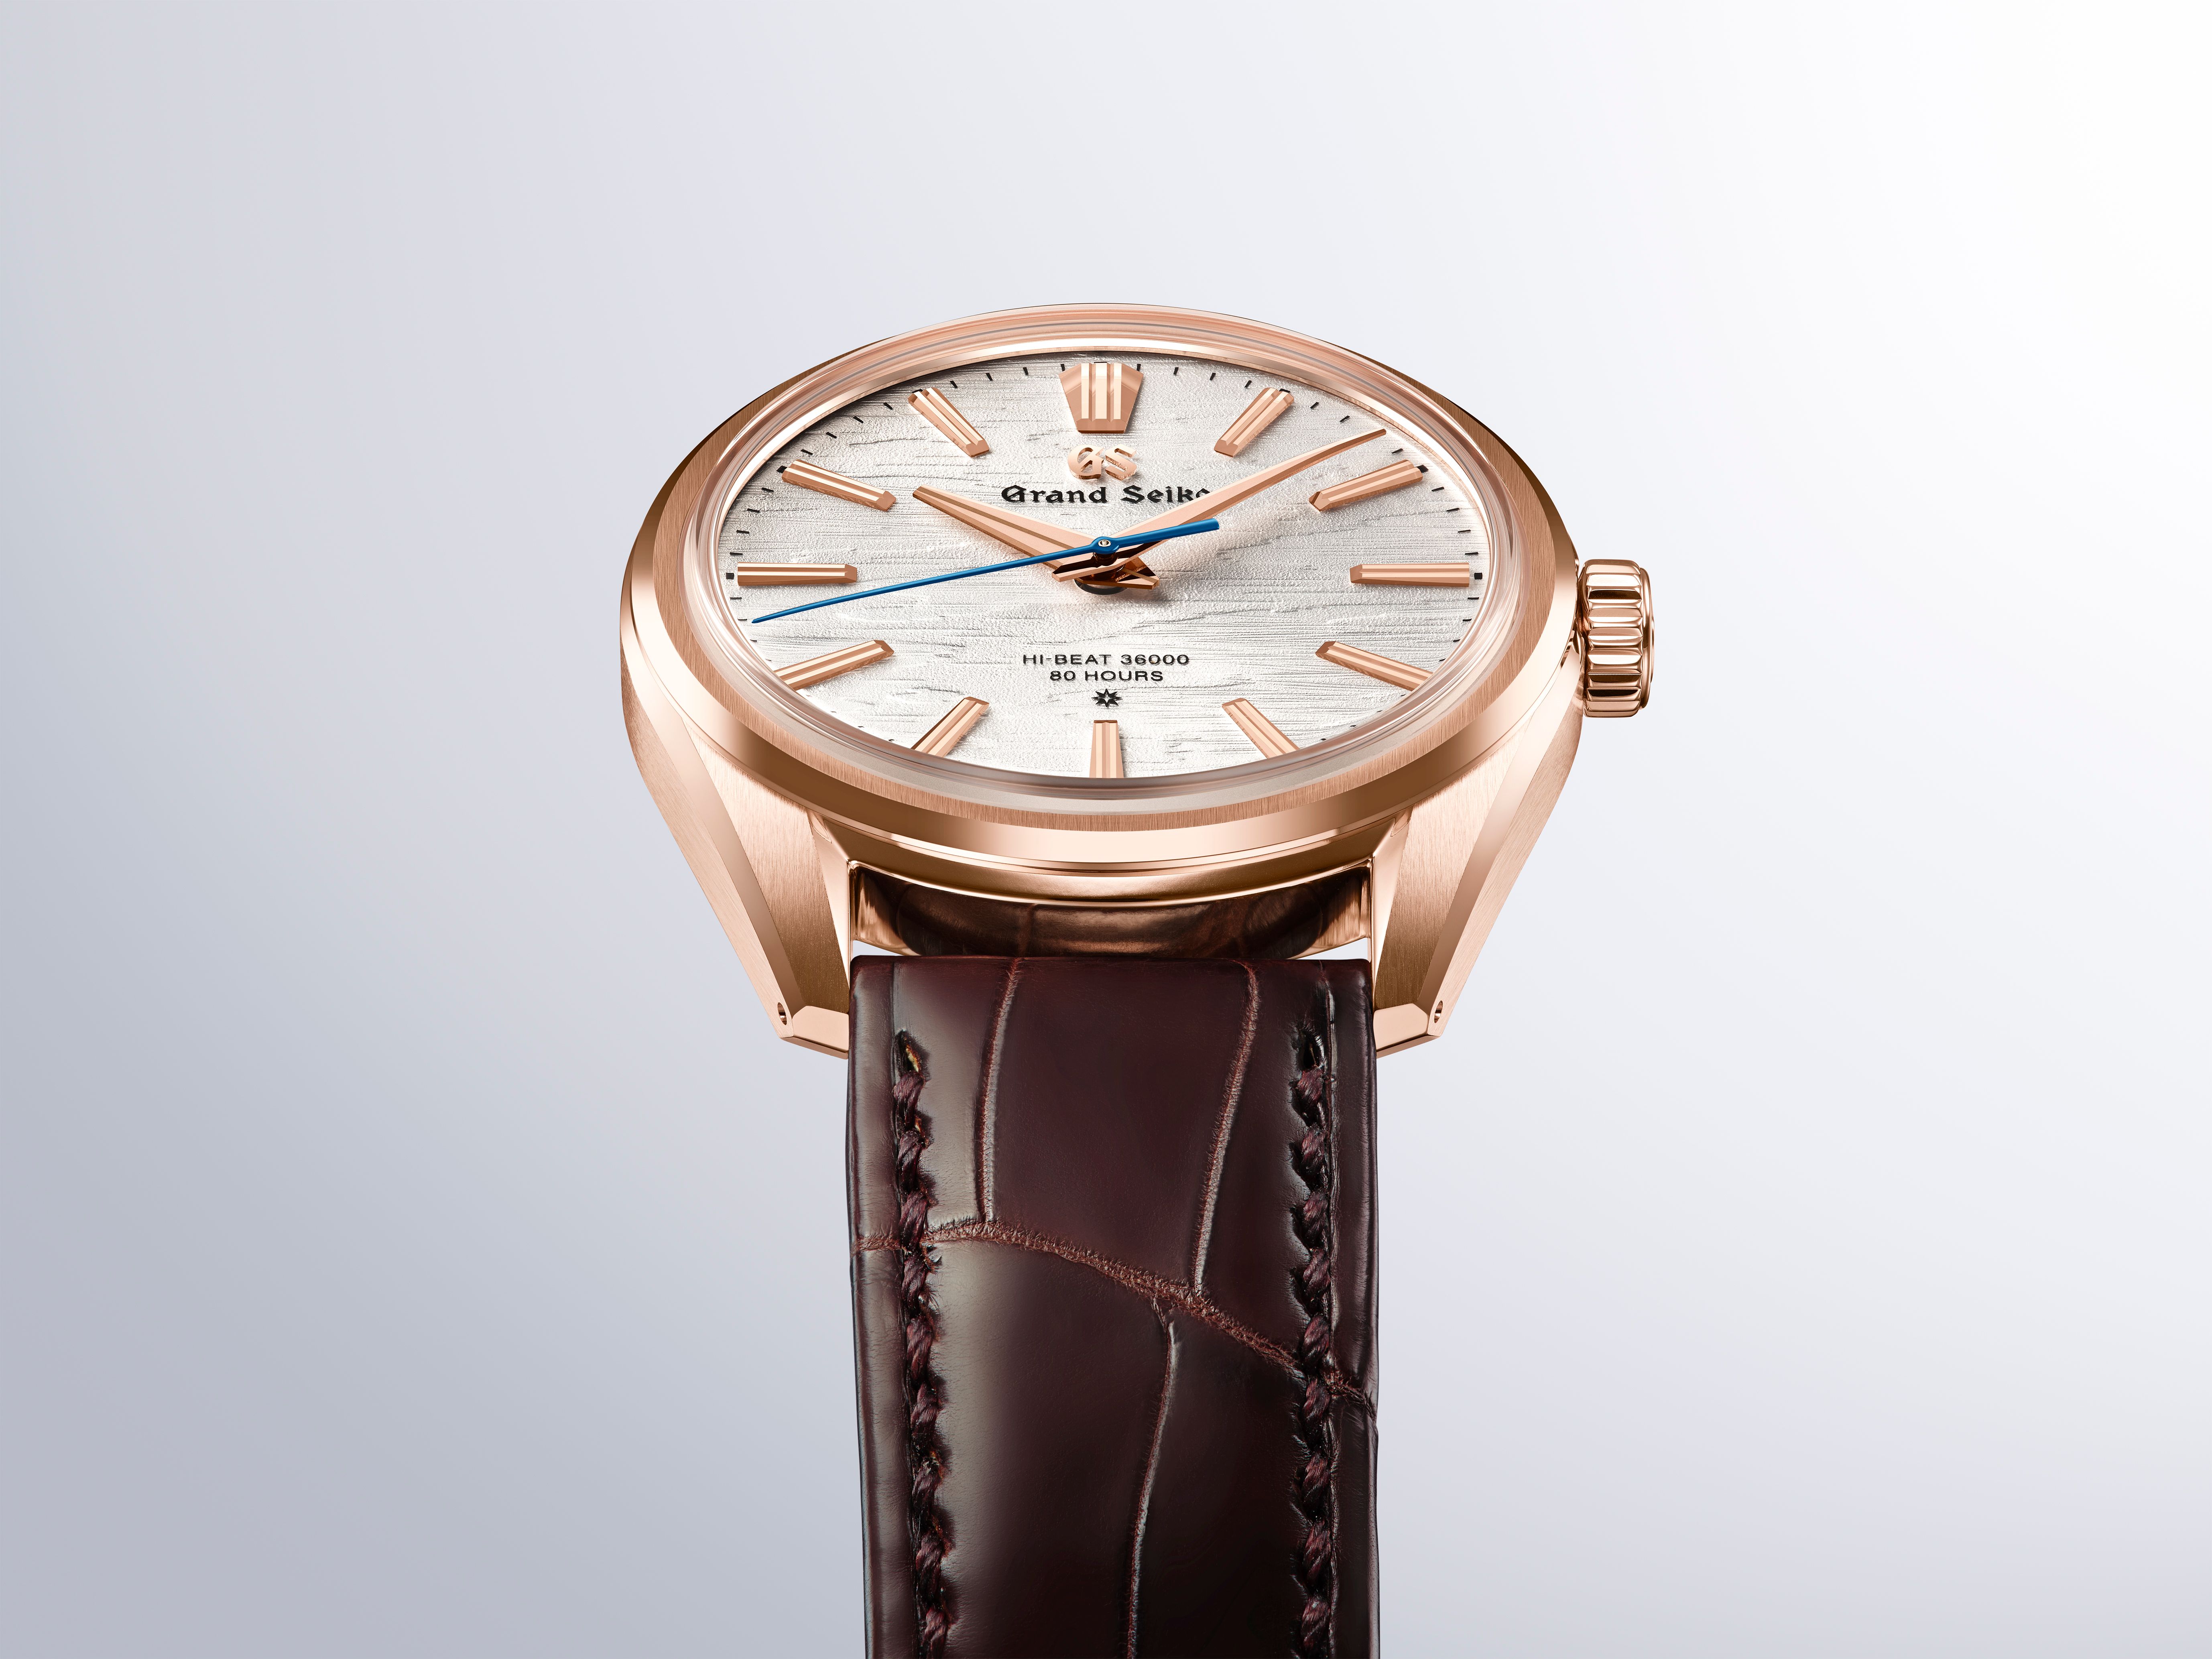 A limited-edition 18k rose gold variant joins the Evolution 9 collection